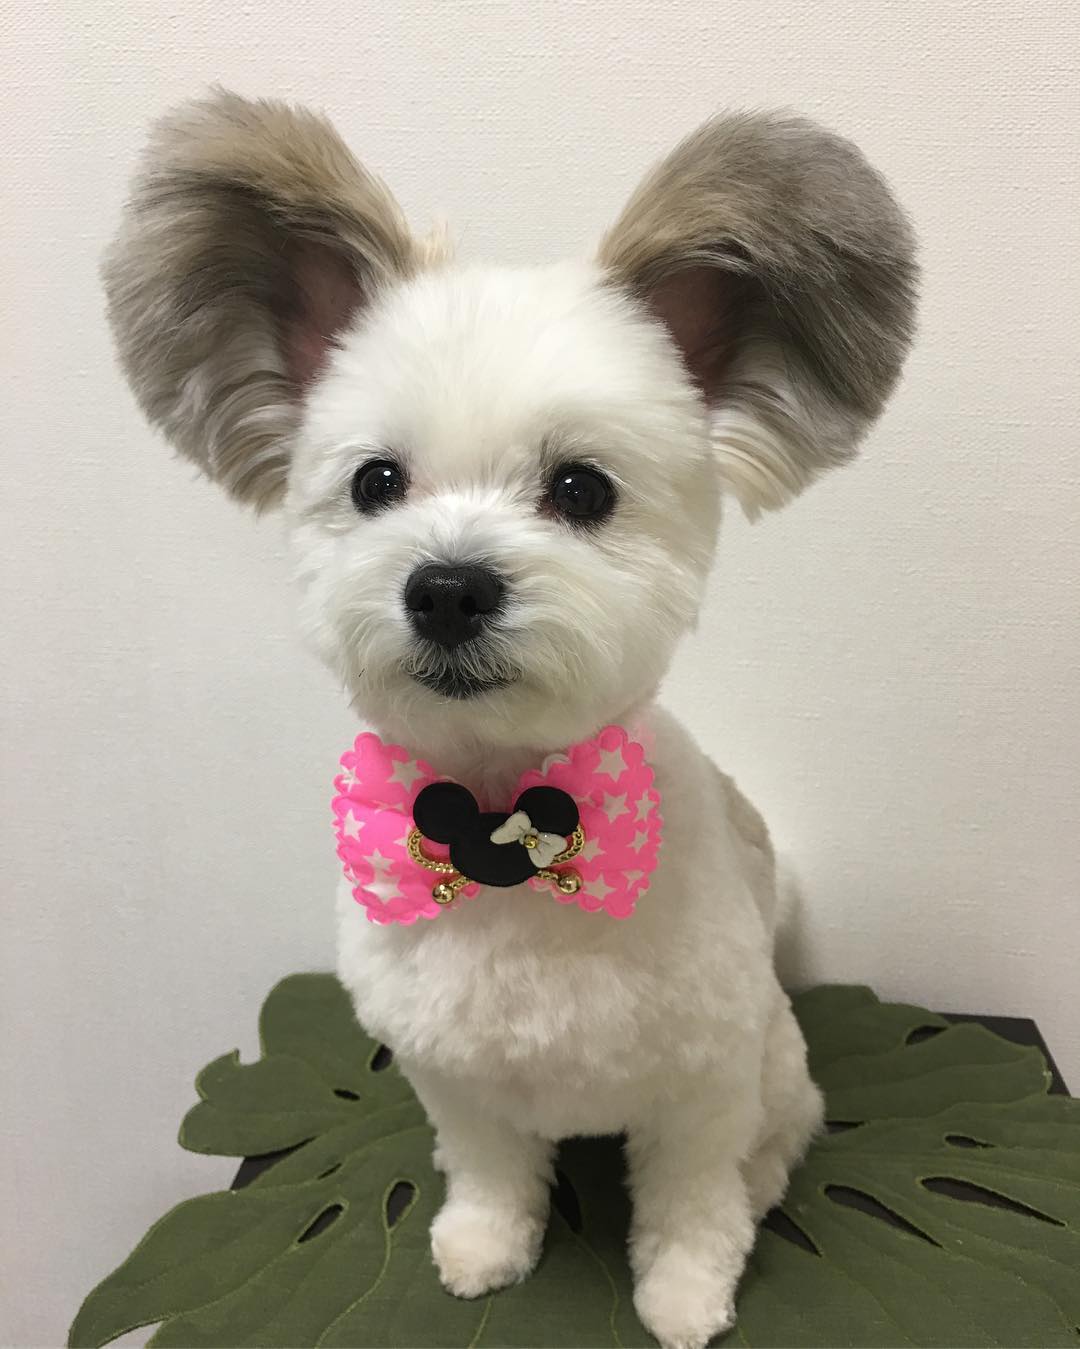 Goma the dog with Mickey Mouse ears